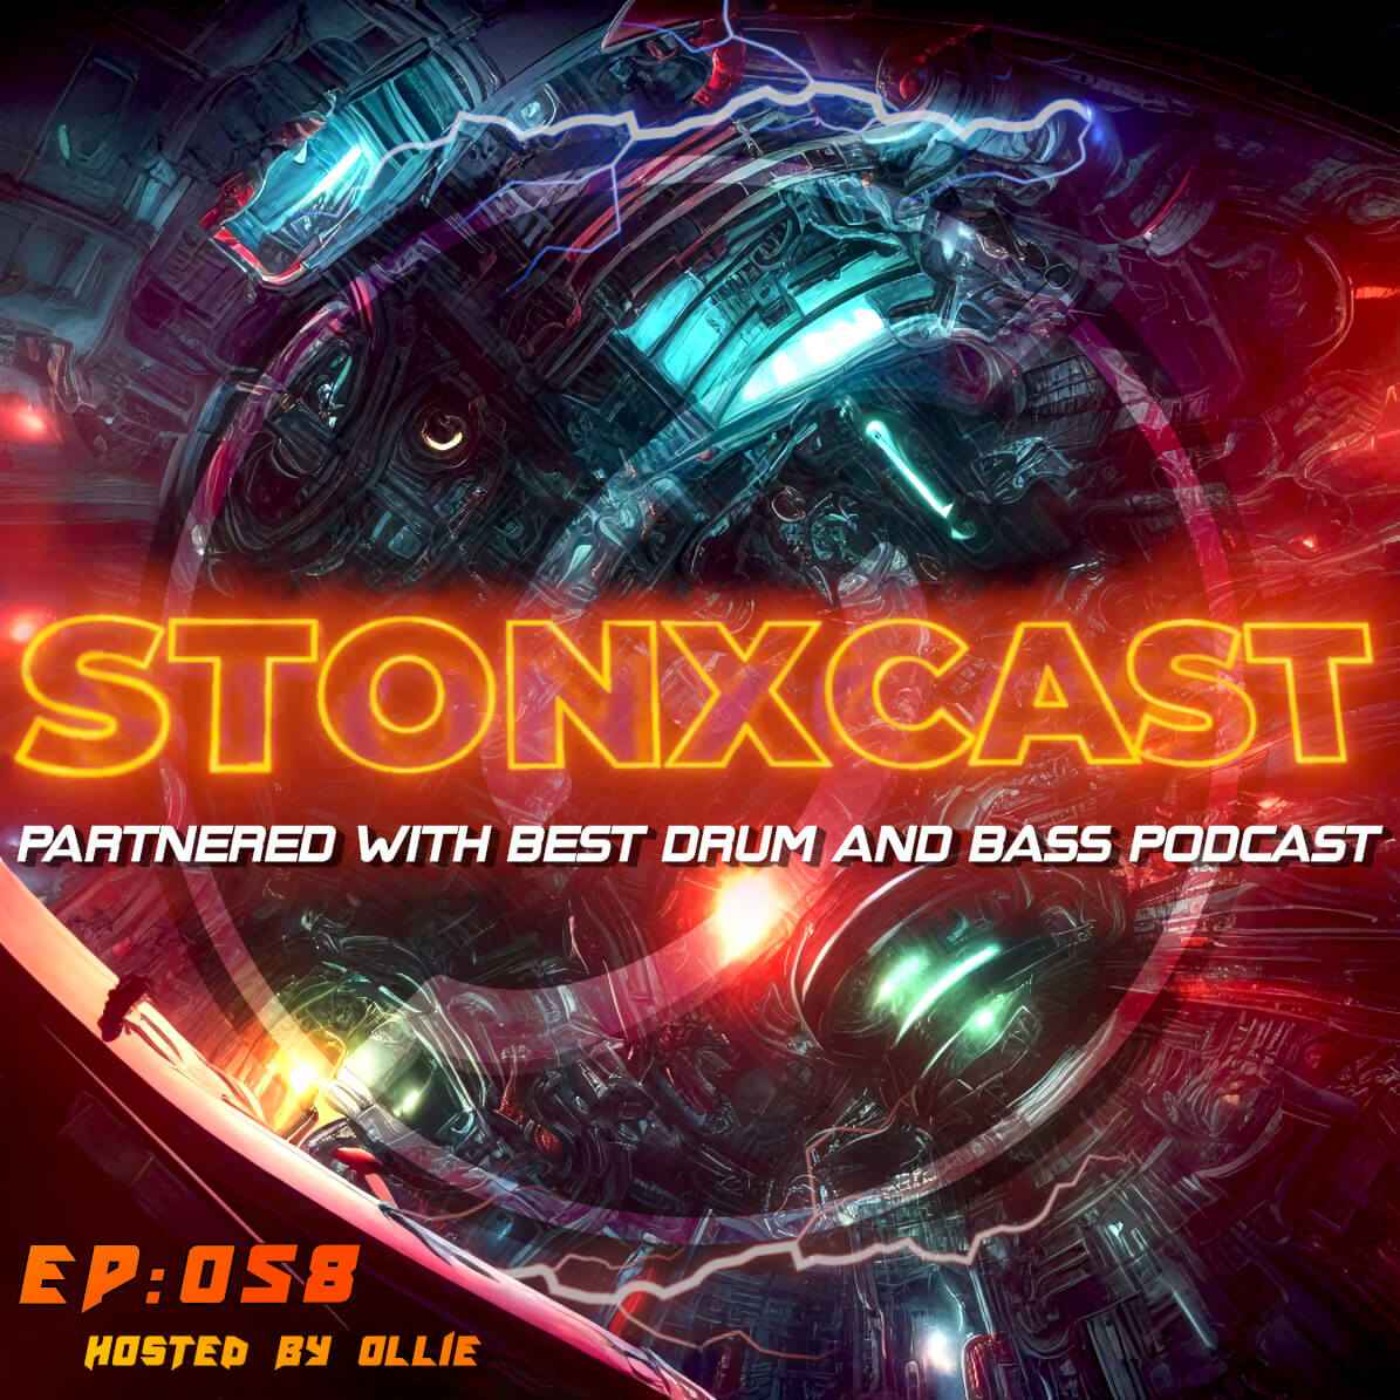 Stonxcast EP:058 - Hosted by Ollie Artwork